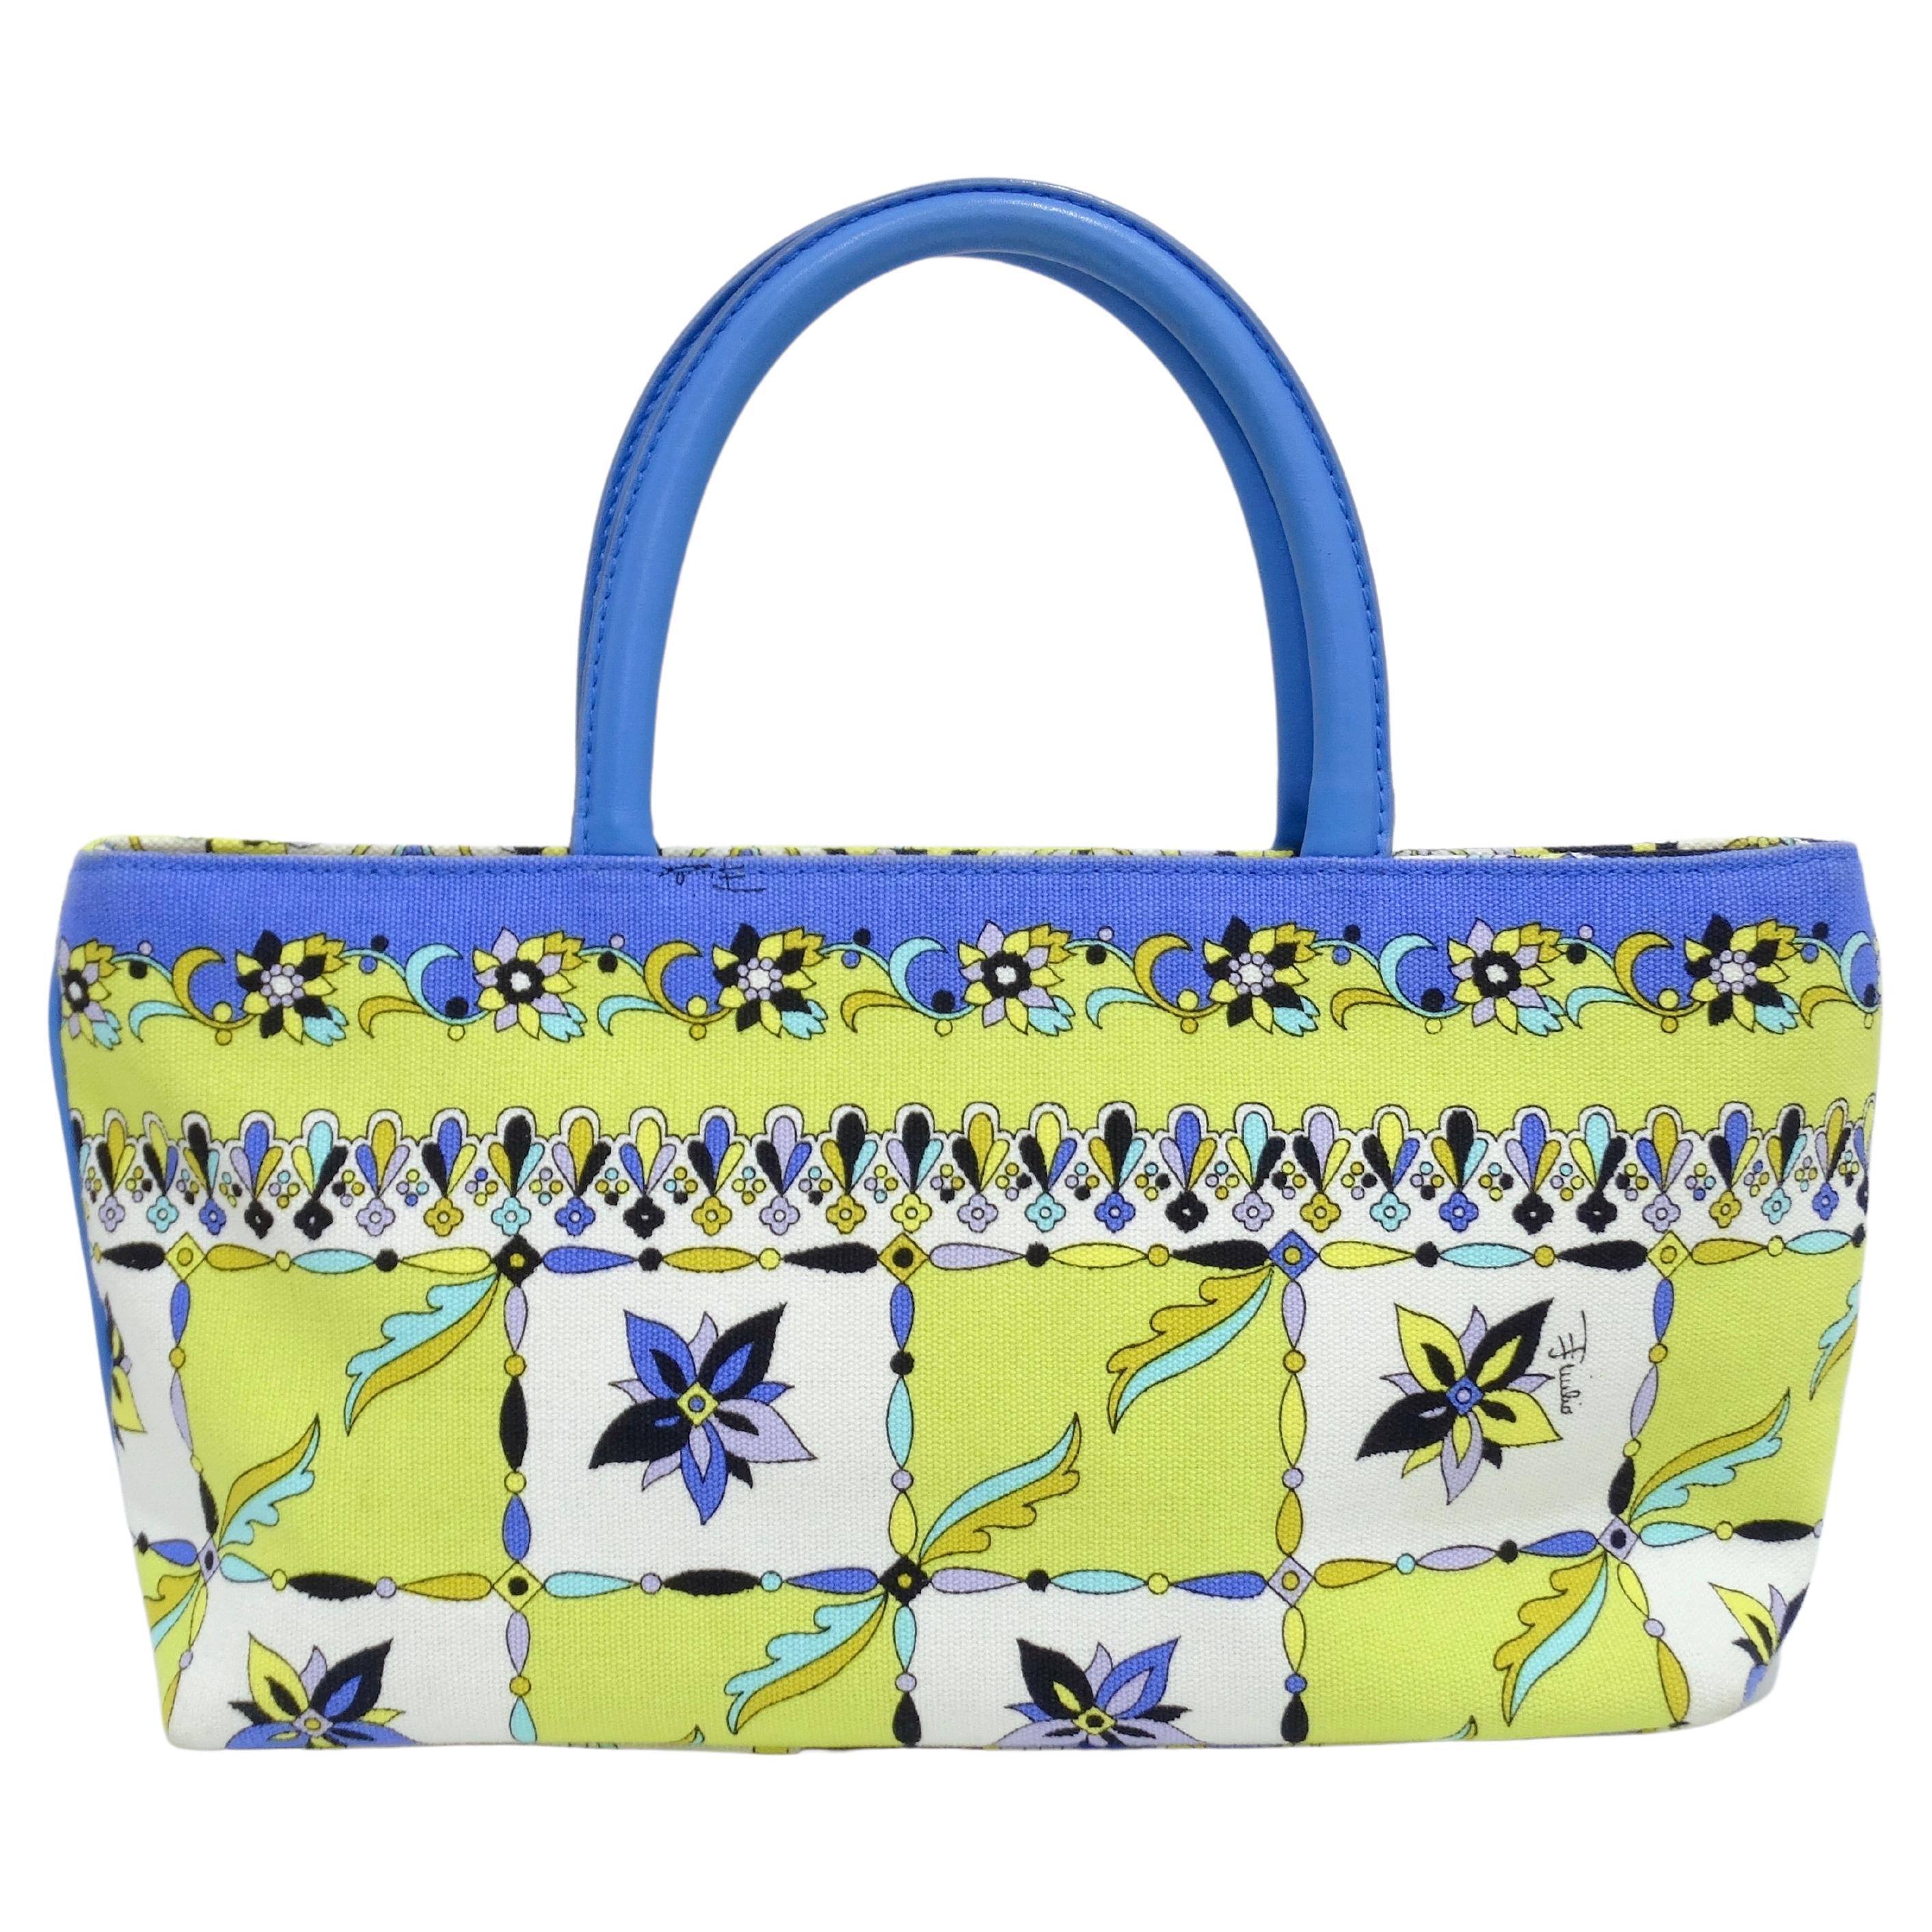 Snag this unique print Pucci bag for the upcoming poolside season. Emilio Pucci is known for his fluid shapes, kaleidoscopic motifs, and bright colors. This bag features a beautiful blue leather handle, intricate flower print with hues of lime